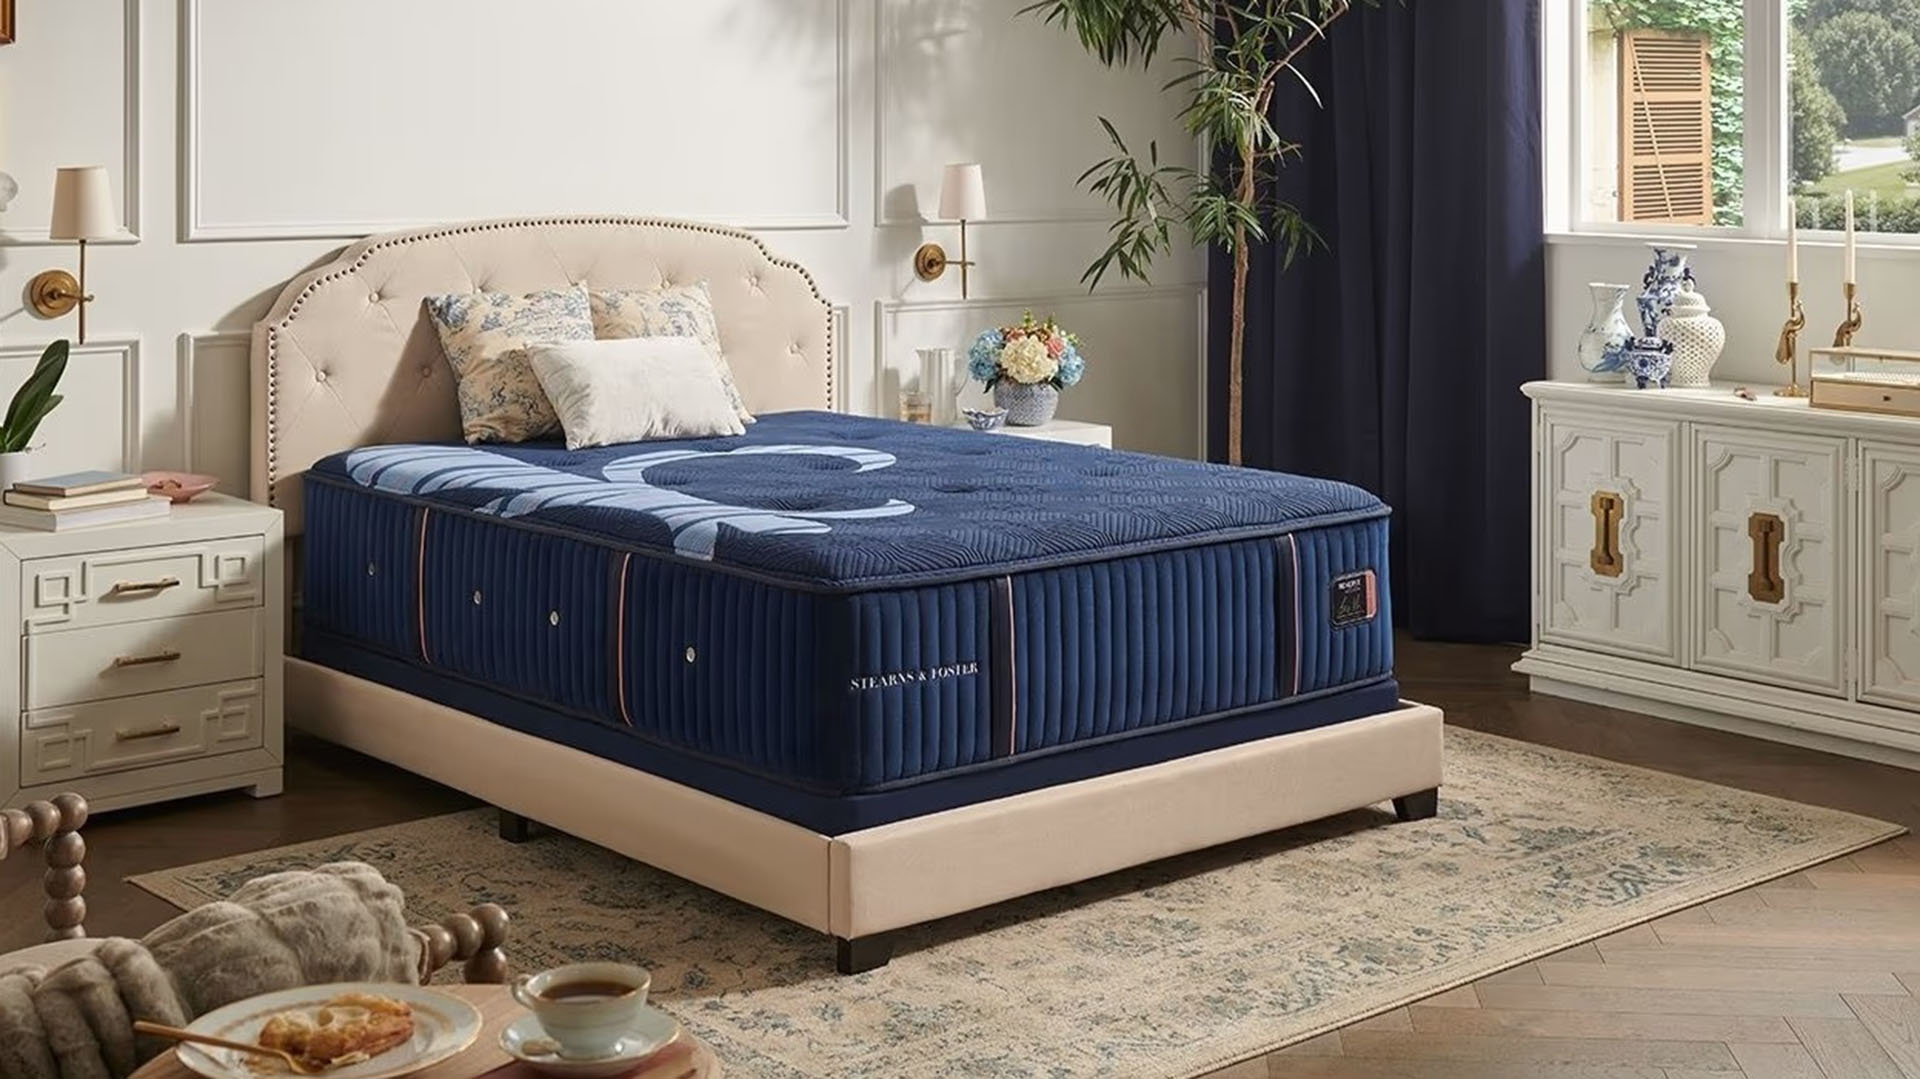 Stearns & Foster mattresses in Westminster are designed with comfort and support in mind.